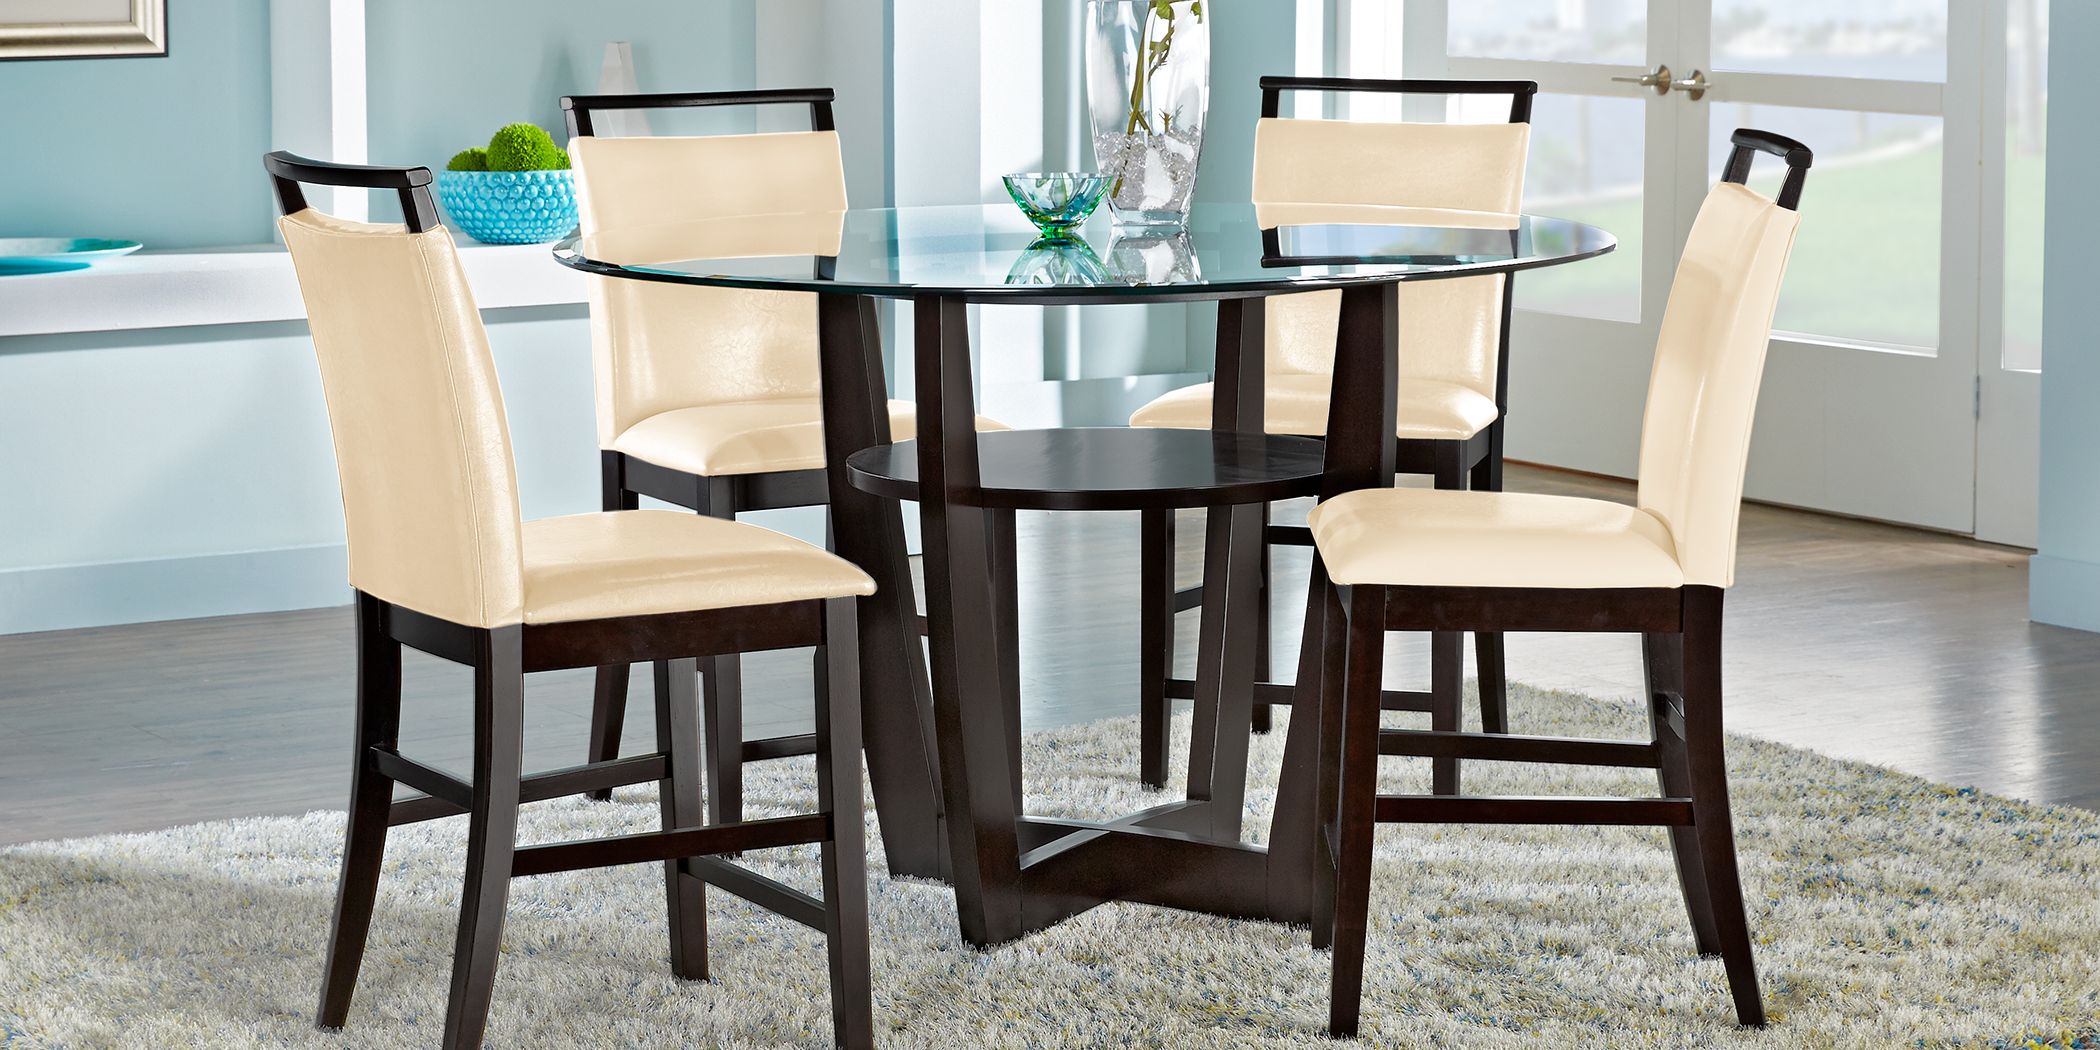 Counter Height Dining Room Table Sets, Bar Stool Height Table Set